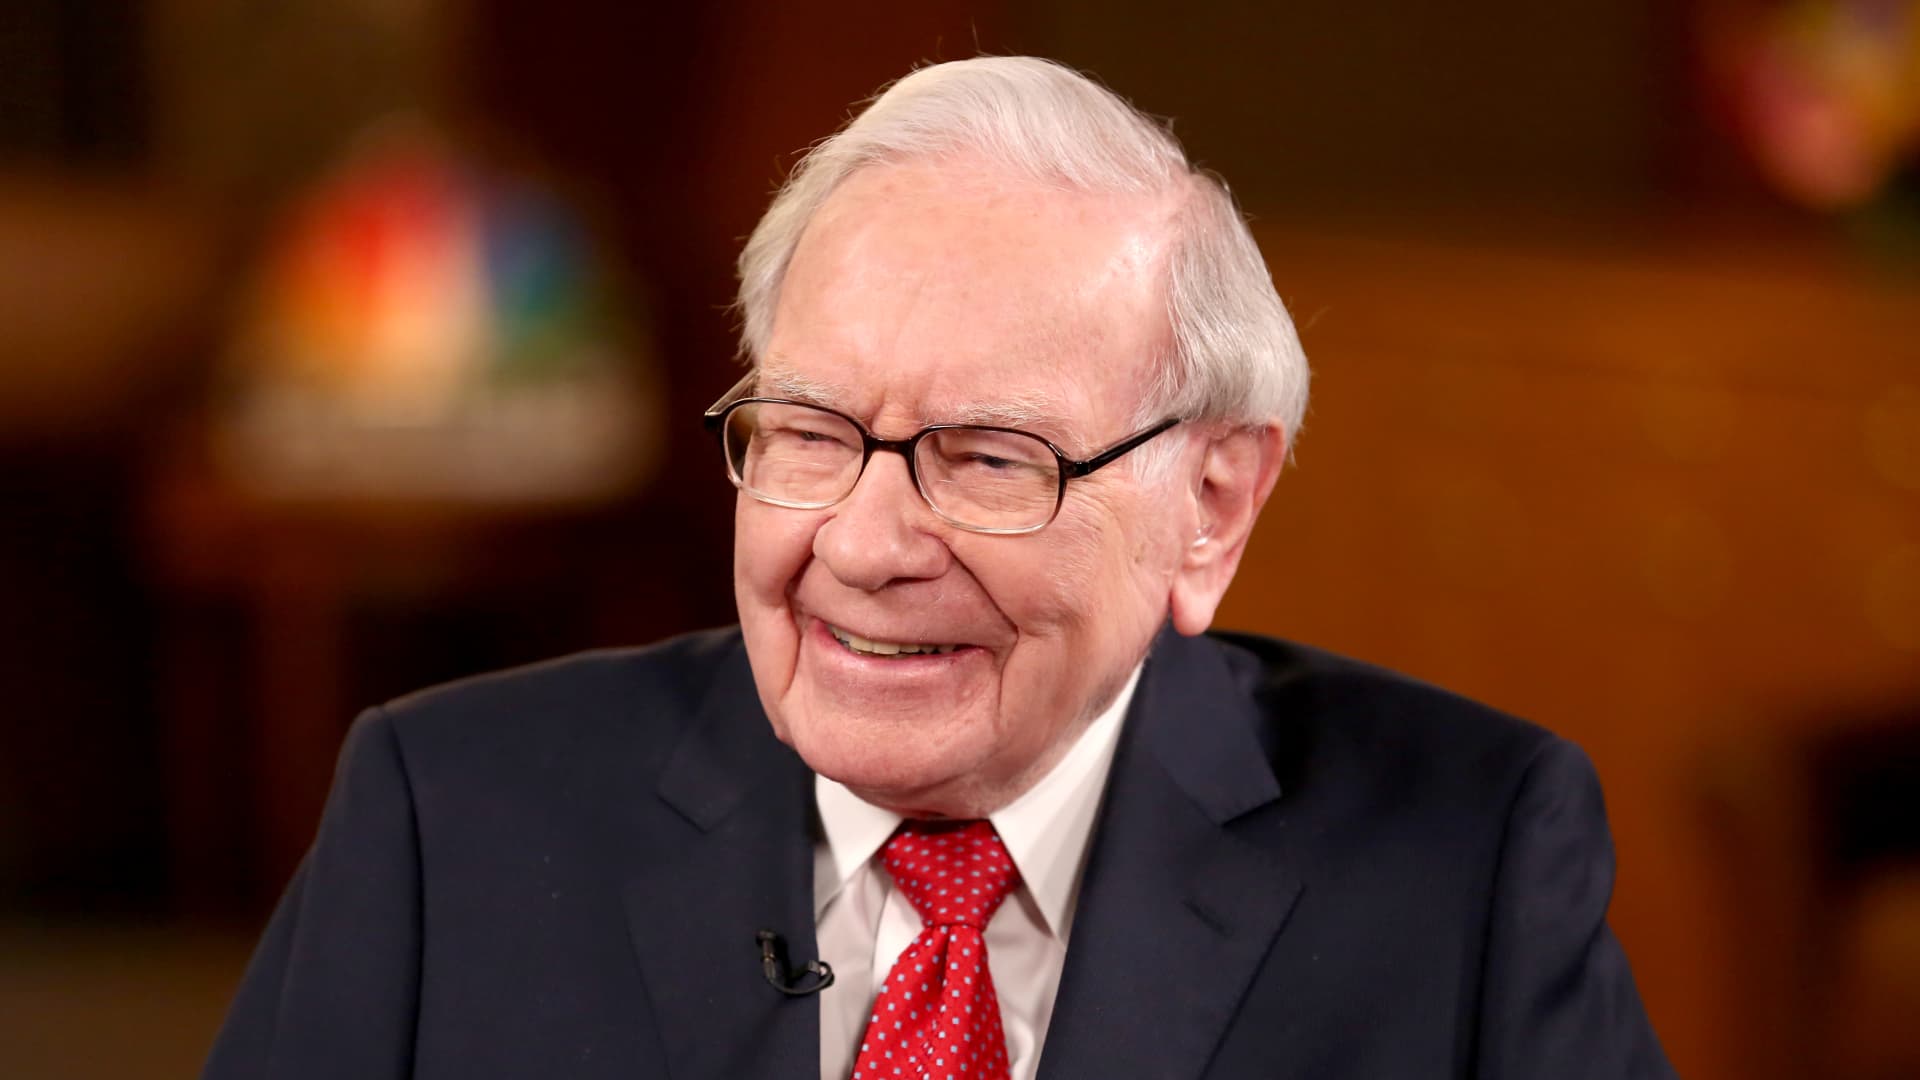 Berkshire Hathaway fourth-quarter operating earnings fall 8%, cash hoard swells to nearly $130 billion